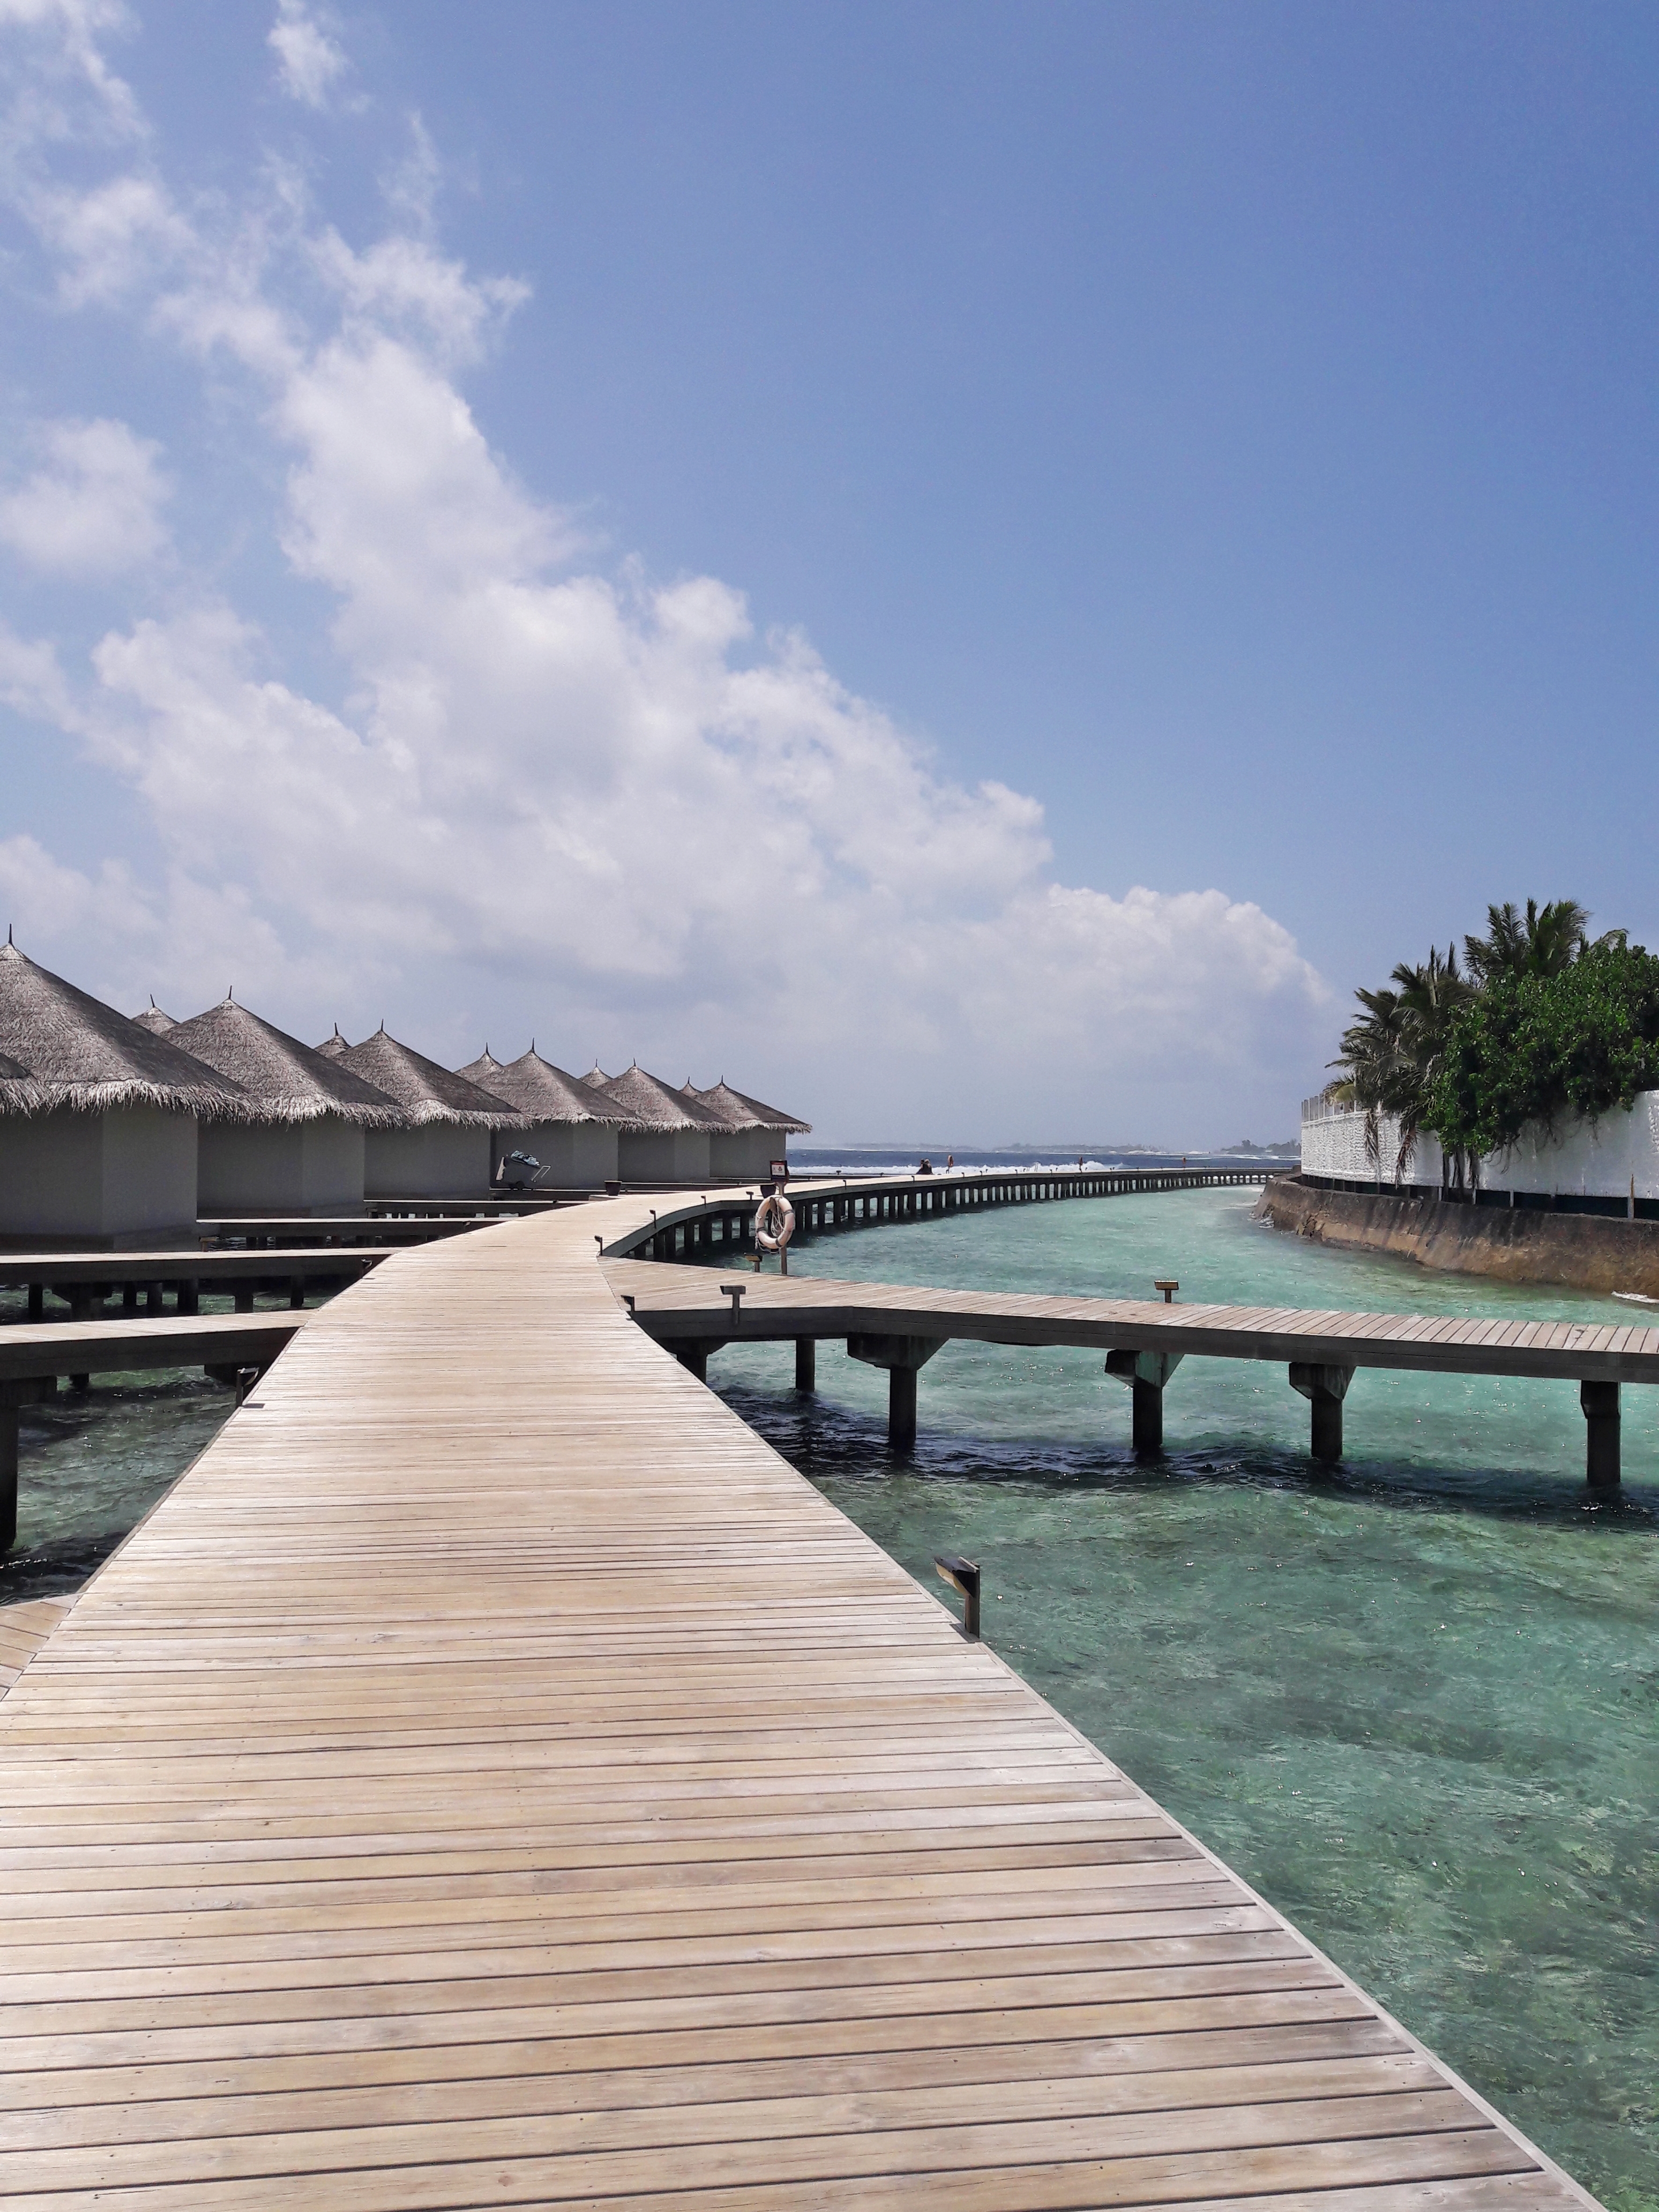 Paradisiacal view of the Water Bungalows from the other end